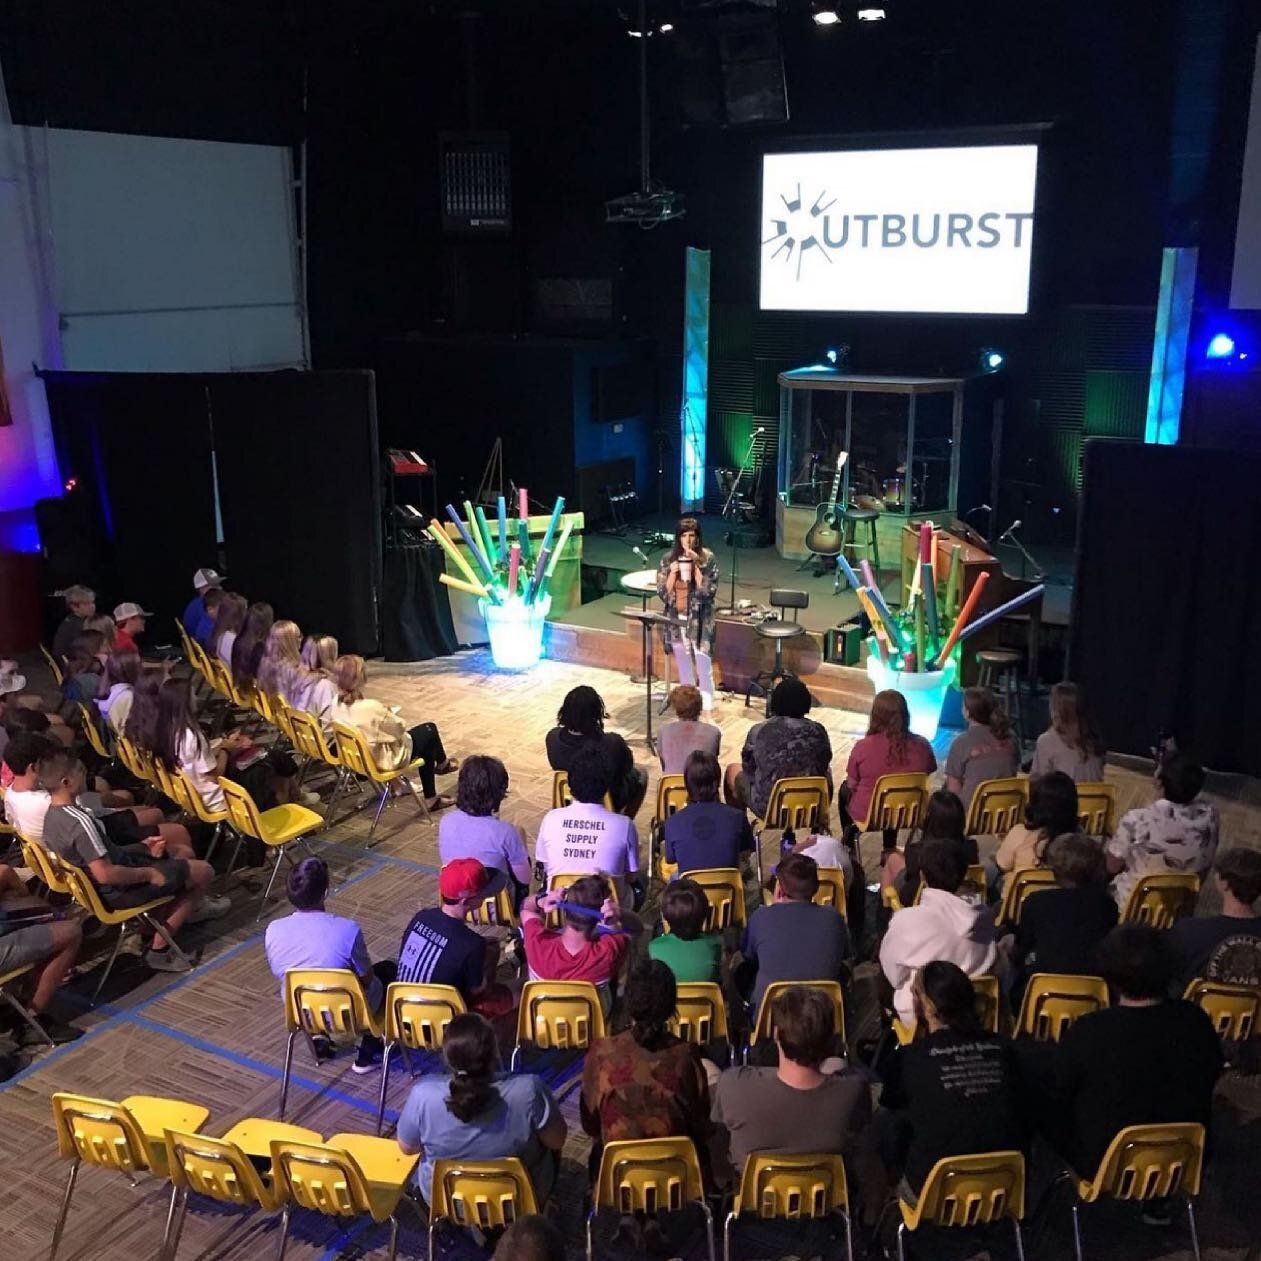 Outburst was a great time and a great turnout! 💥 Thanks to all who made this possible (including @hopebuhler who you can see teaching in the photo)!

📸: @chipbuhler